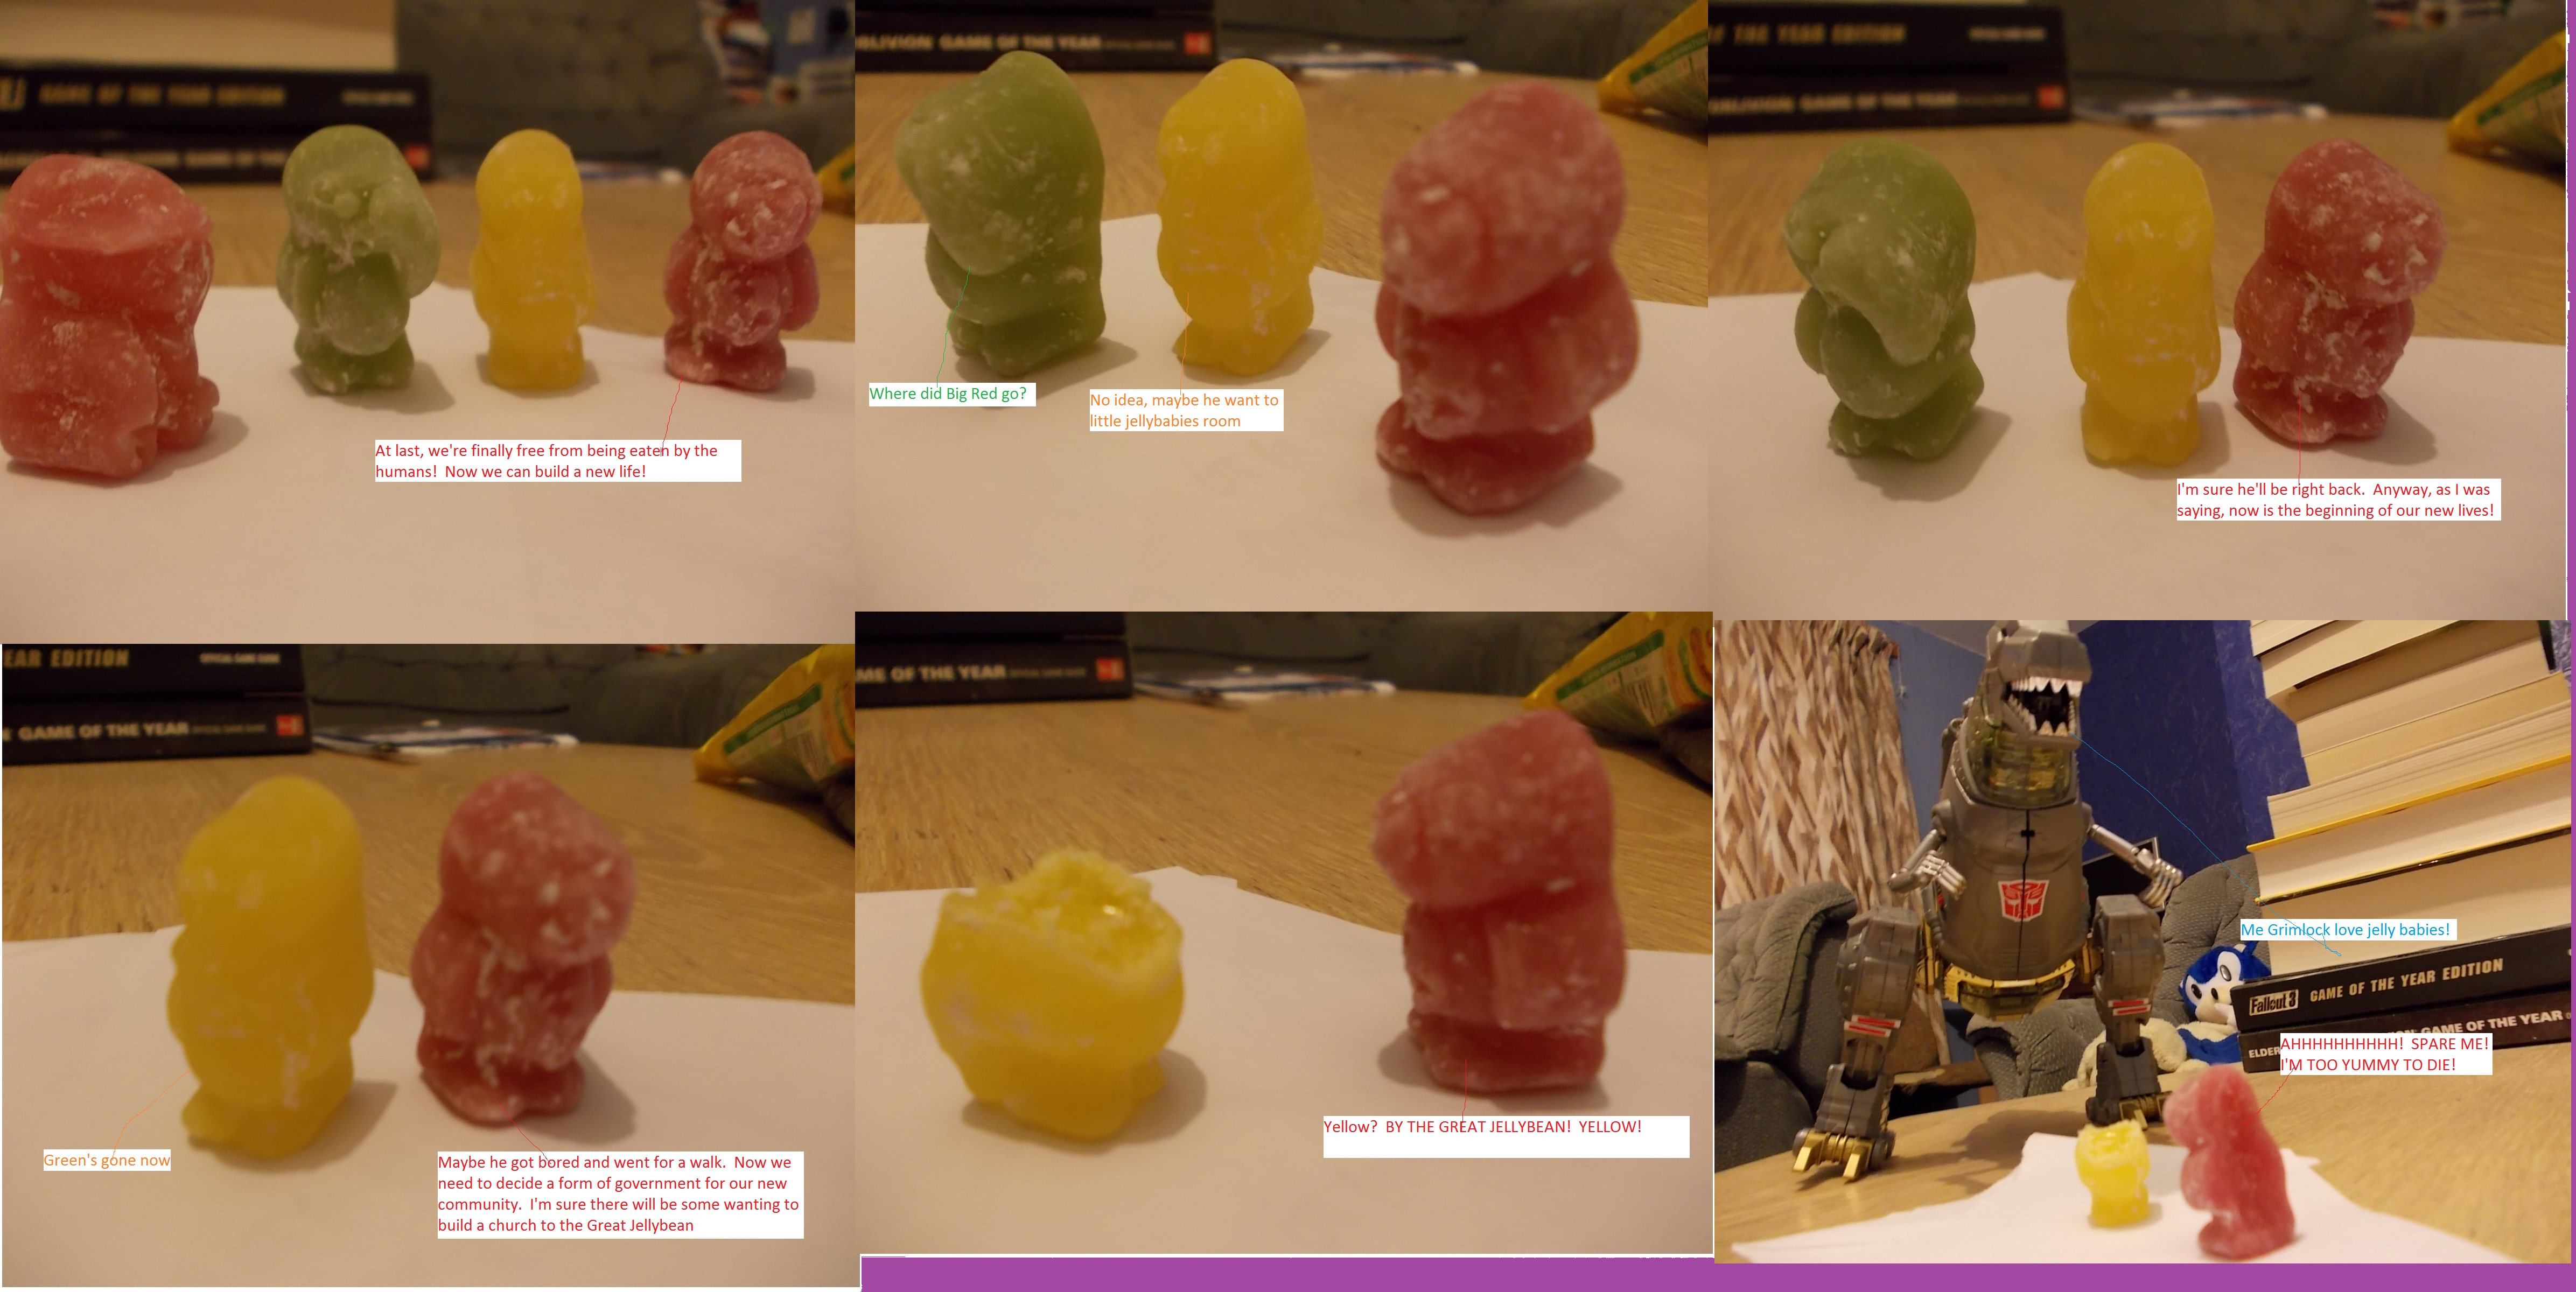 pity_the_jellybabies_by_reinahw-d5qtmdm.jpg